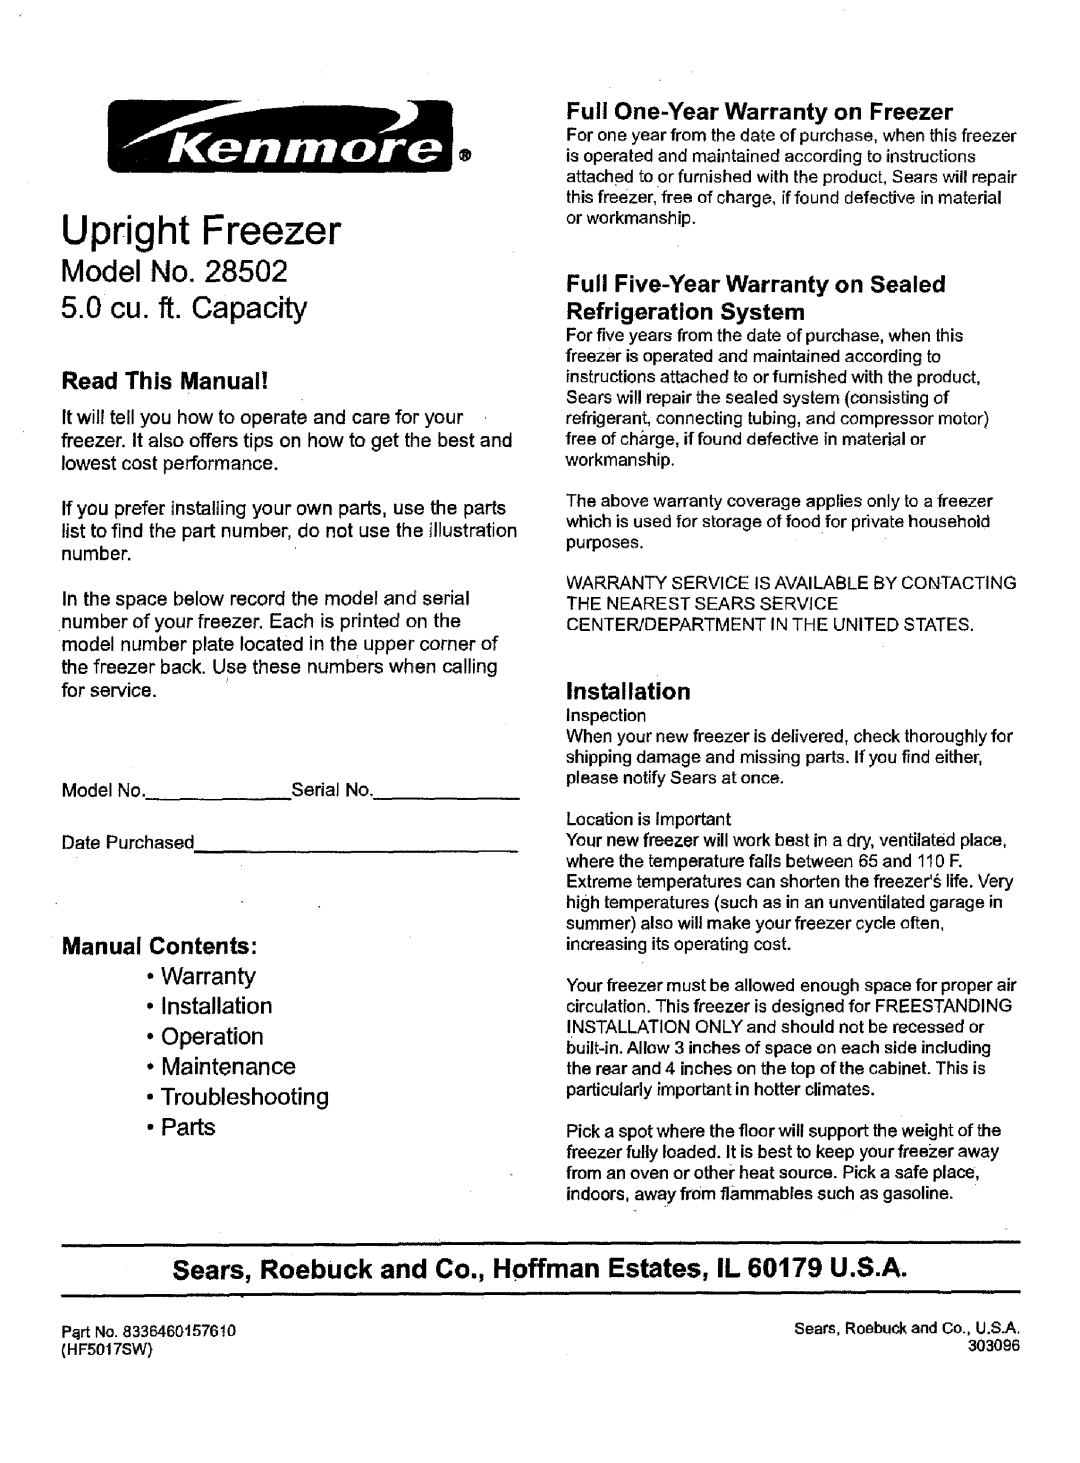 Kenmore warranty Model No. 28502 5.0 cu. ft. Capacity, Upright Freezer, Read This Manual, Manual Contents, Installation 